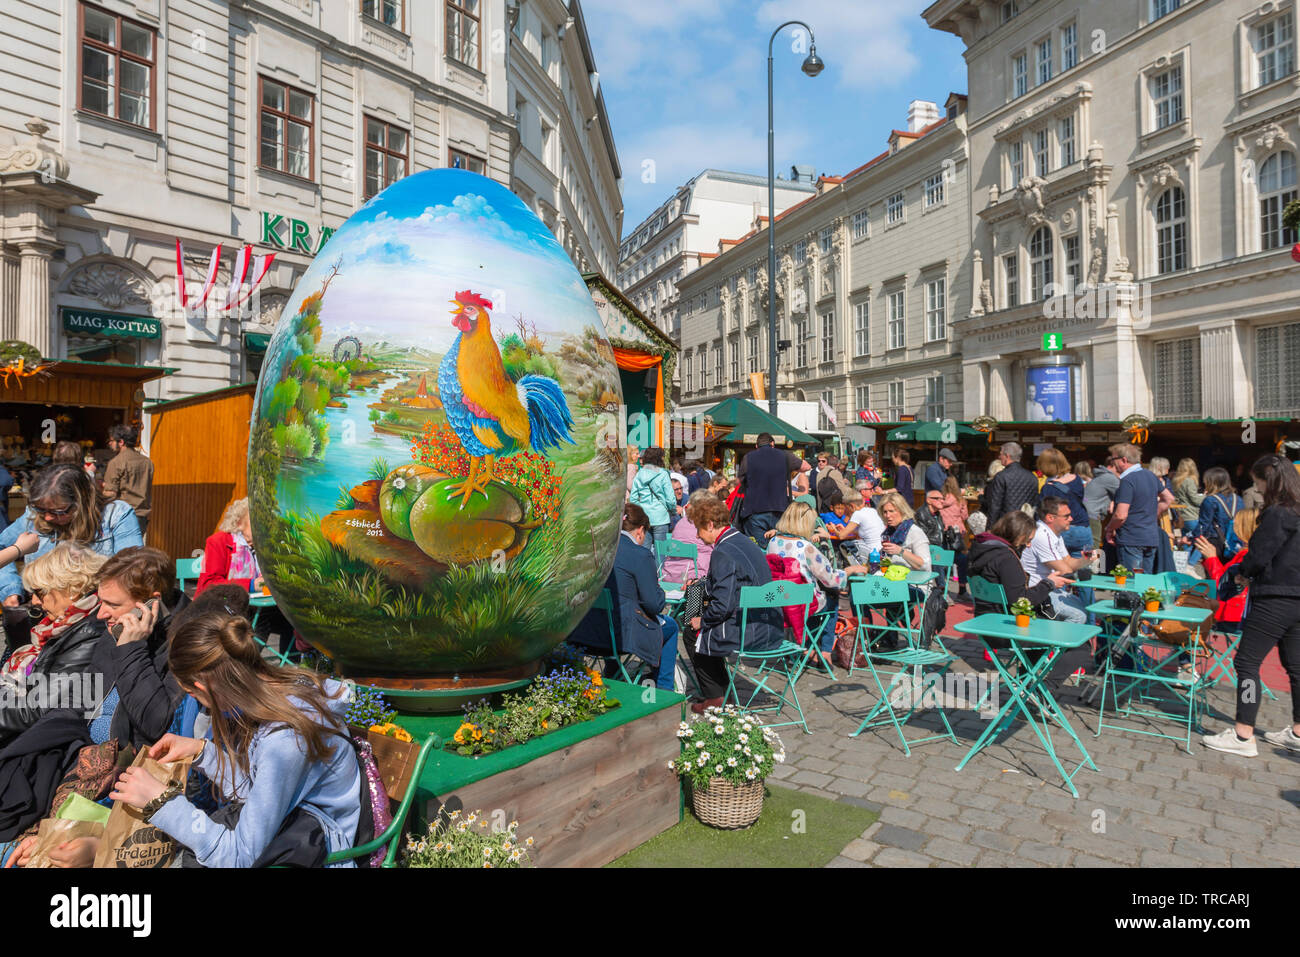 Vienna Easter Market, view of people sitting at cafe tables in the Easter Market in Am Hof in the centre of the city of Vienna, Wien, Austria. Stock Photo